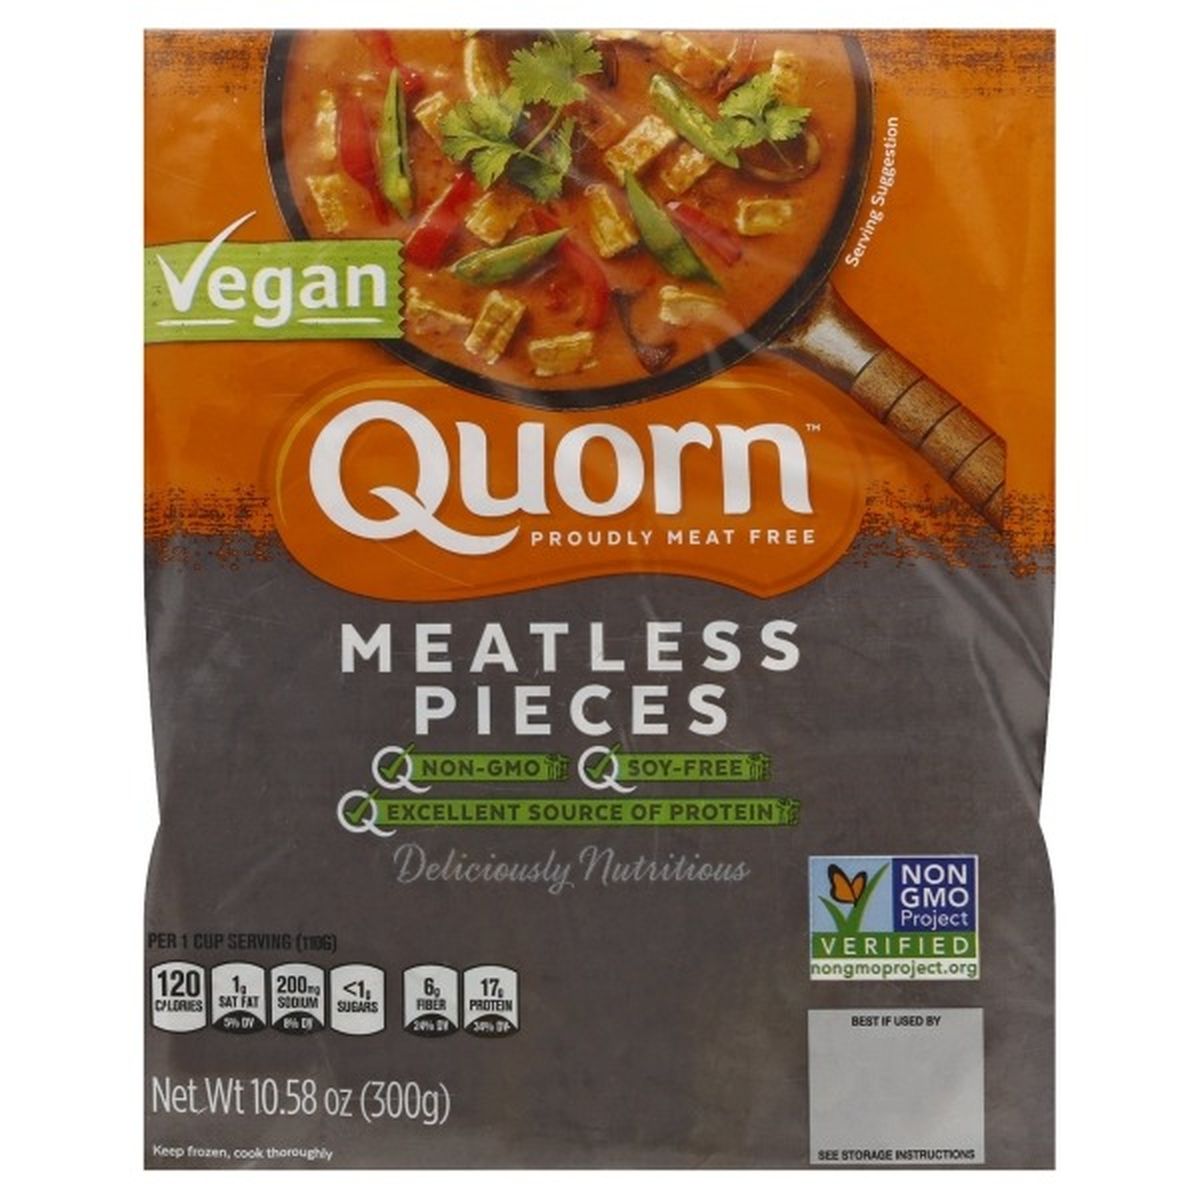 Calories in Quorn Meatless Pieces